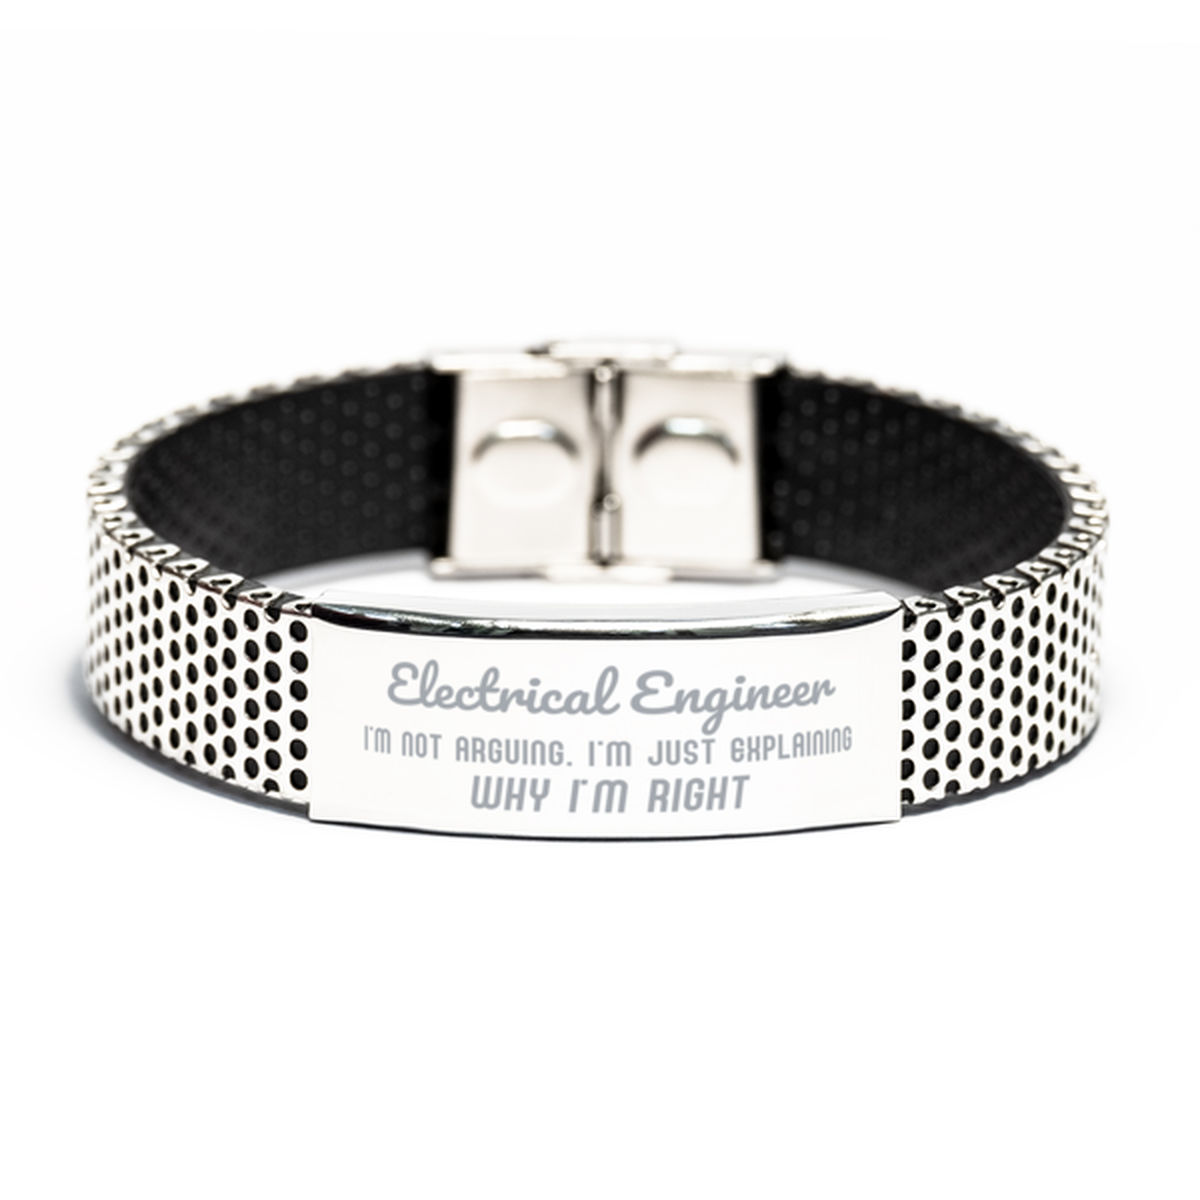 Electrical Engineer I'm not Arguing. I'm Just Explaining Why I'm RIGHT Stainless Steel Bracelet, Funny Saying Quote Electrical Engineer Gifts For Electrical Engineer Graduation Birthday Christmas Gifts for Men Women Coworker